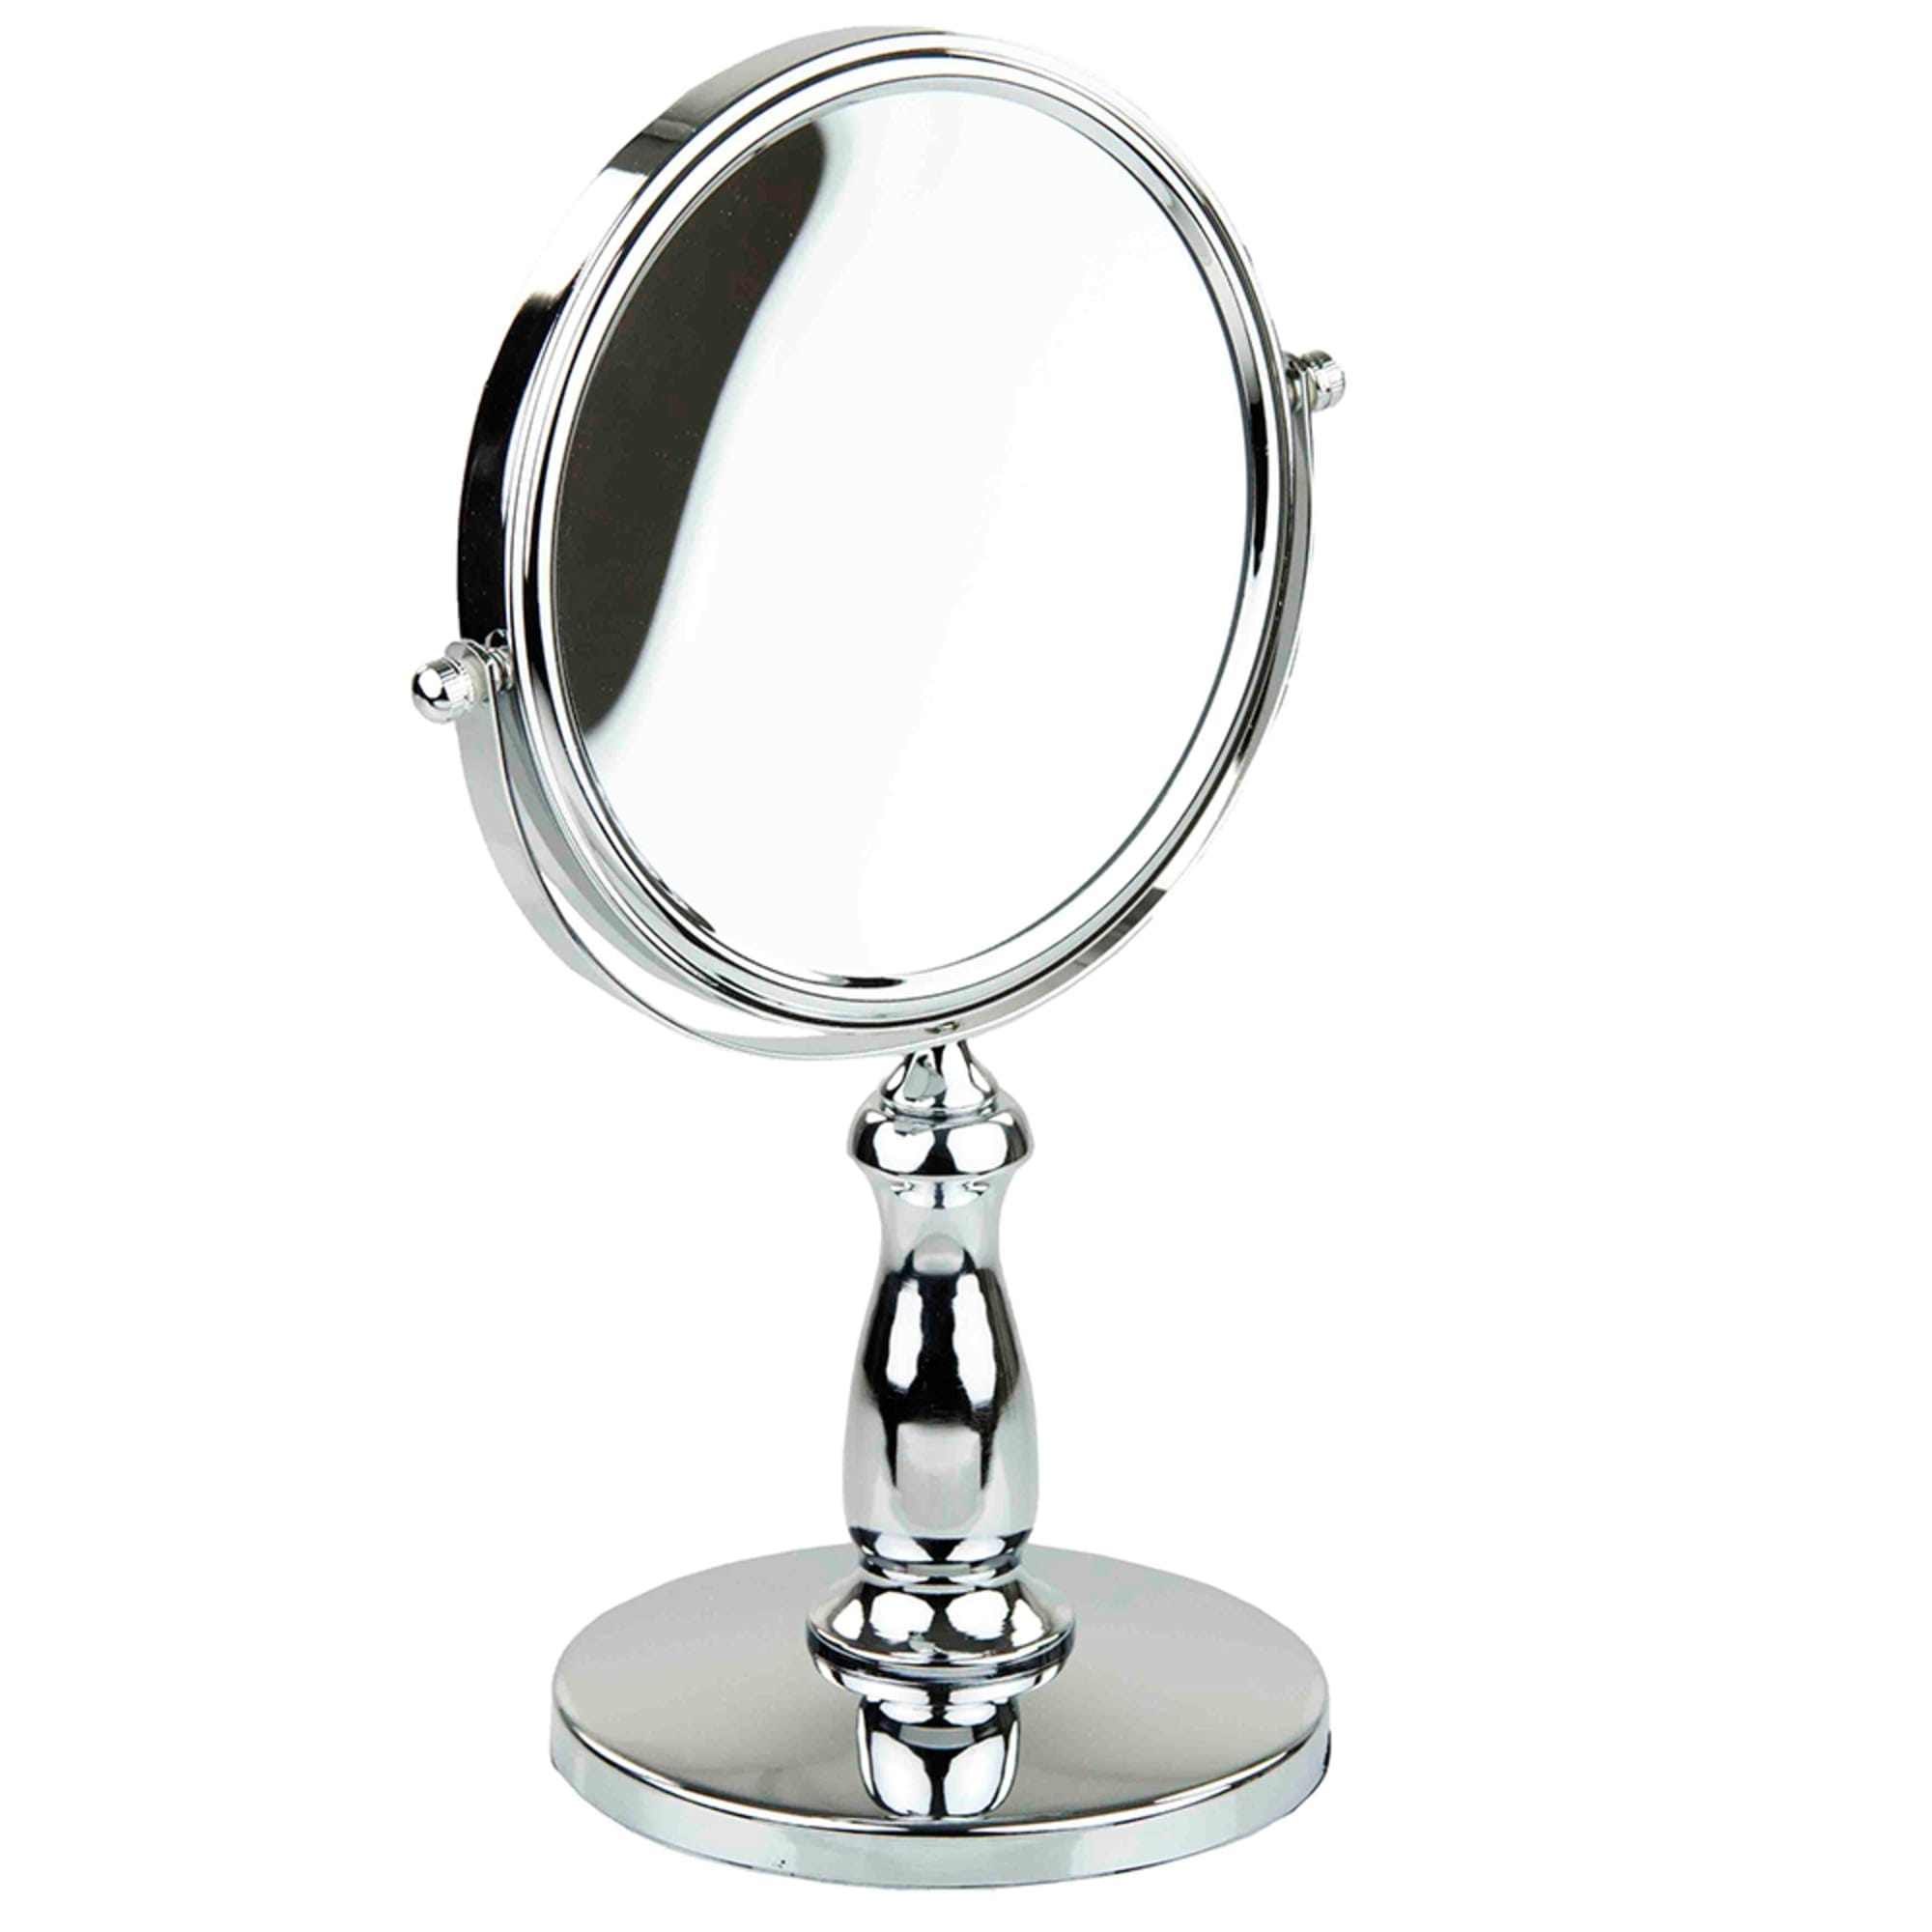 Home Basics Nadia Double Sided Cosmetic Mirror, Chrome $15.00 EACH, CASE PACK OF 6